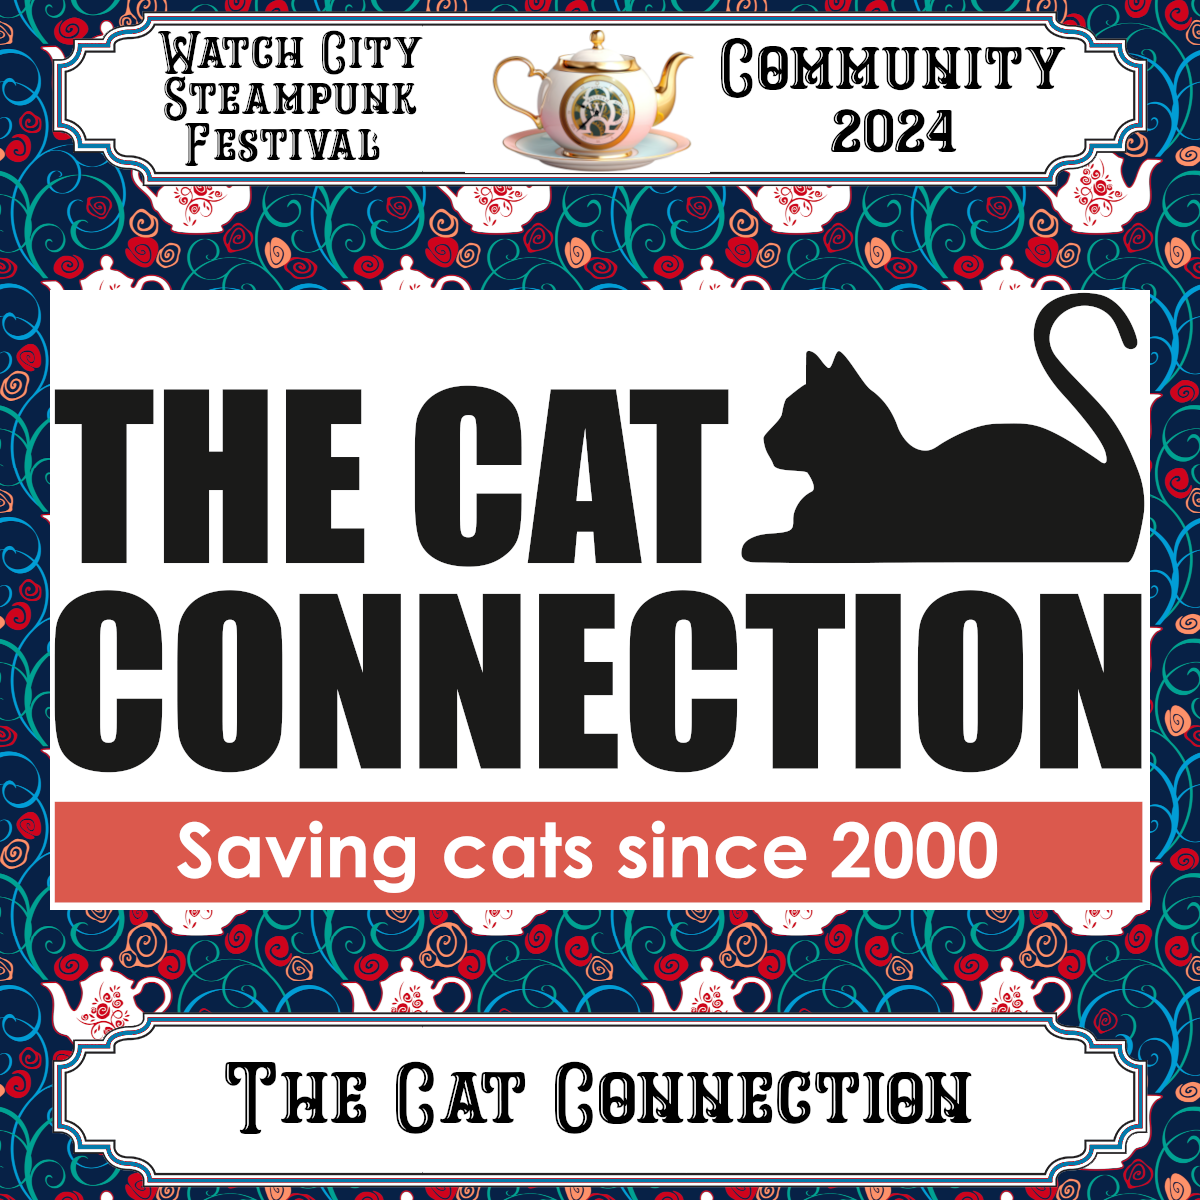 The Cat Connection